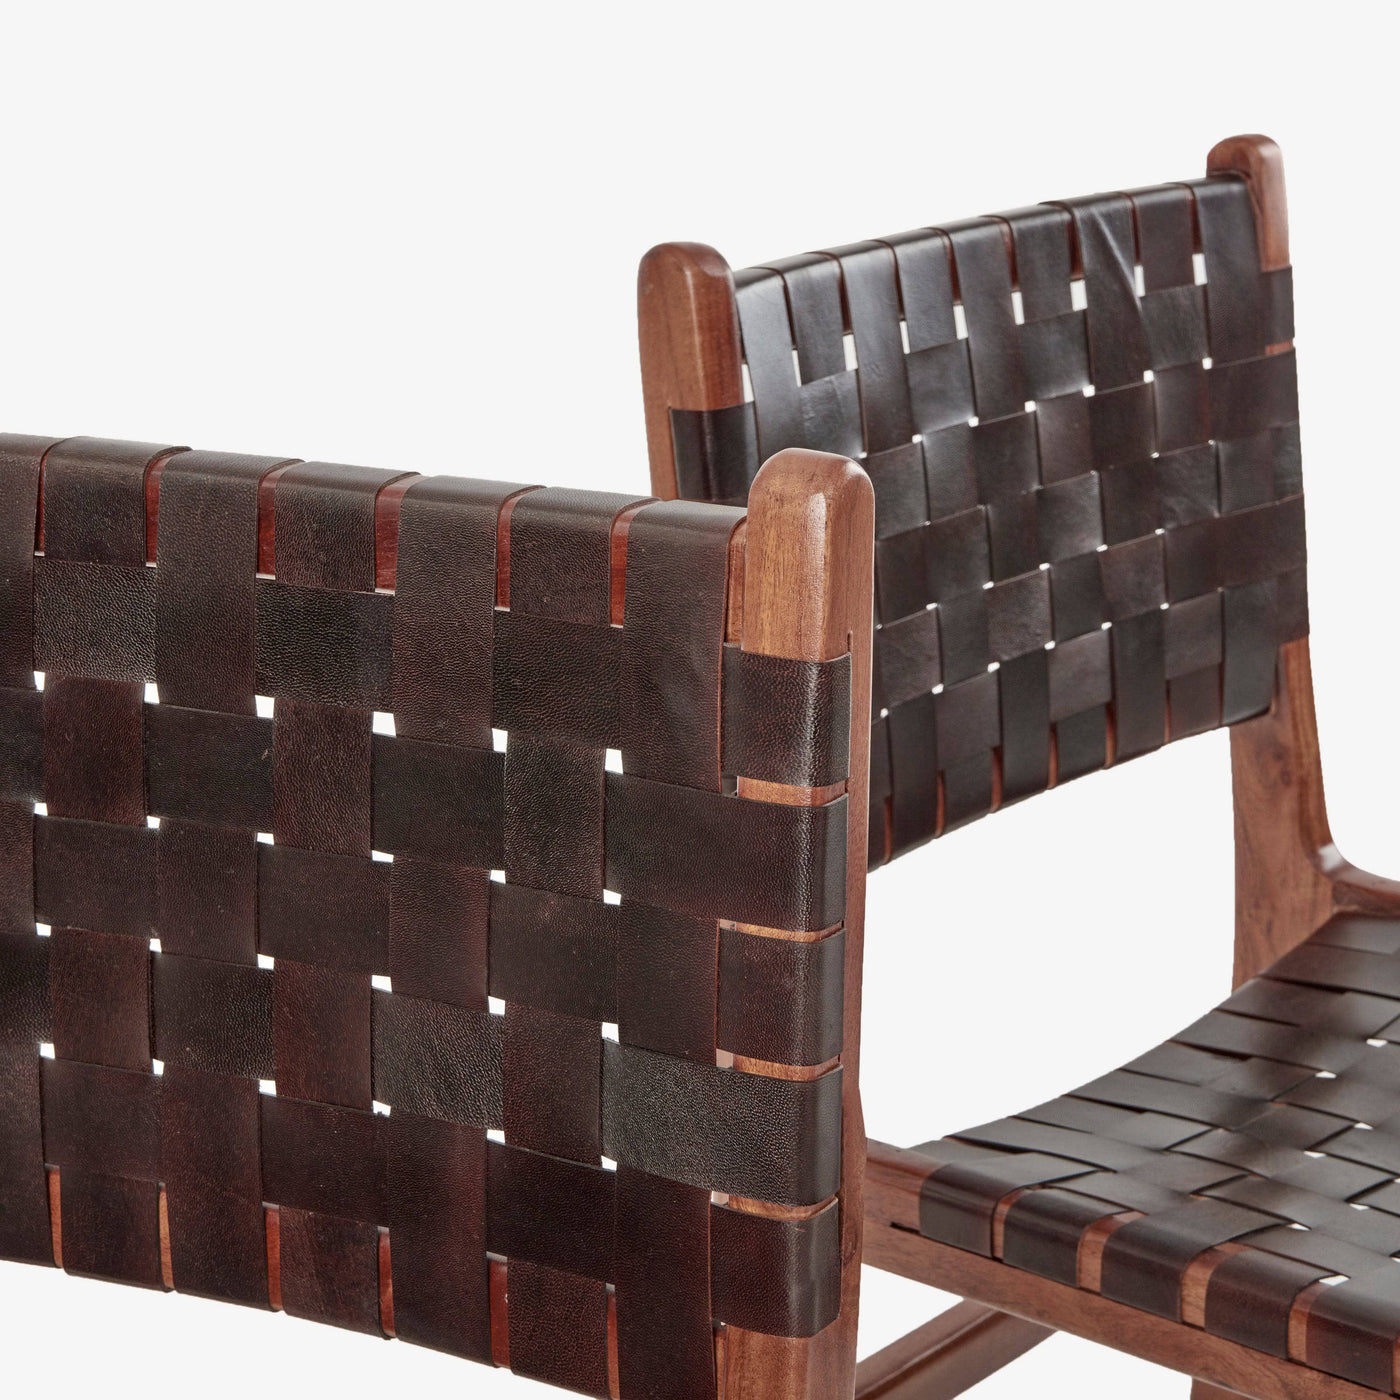 Pomero Woven Leather Dining Chair, Brown Dining Chairs & Benches sazy.com